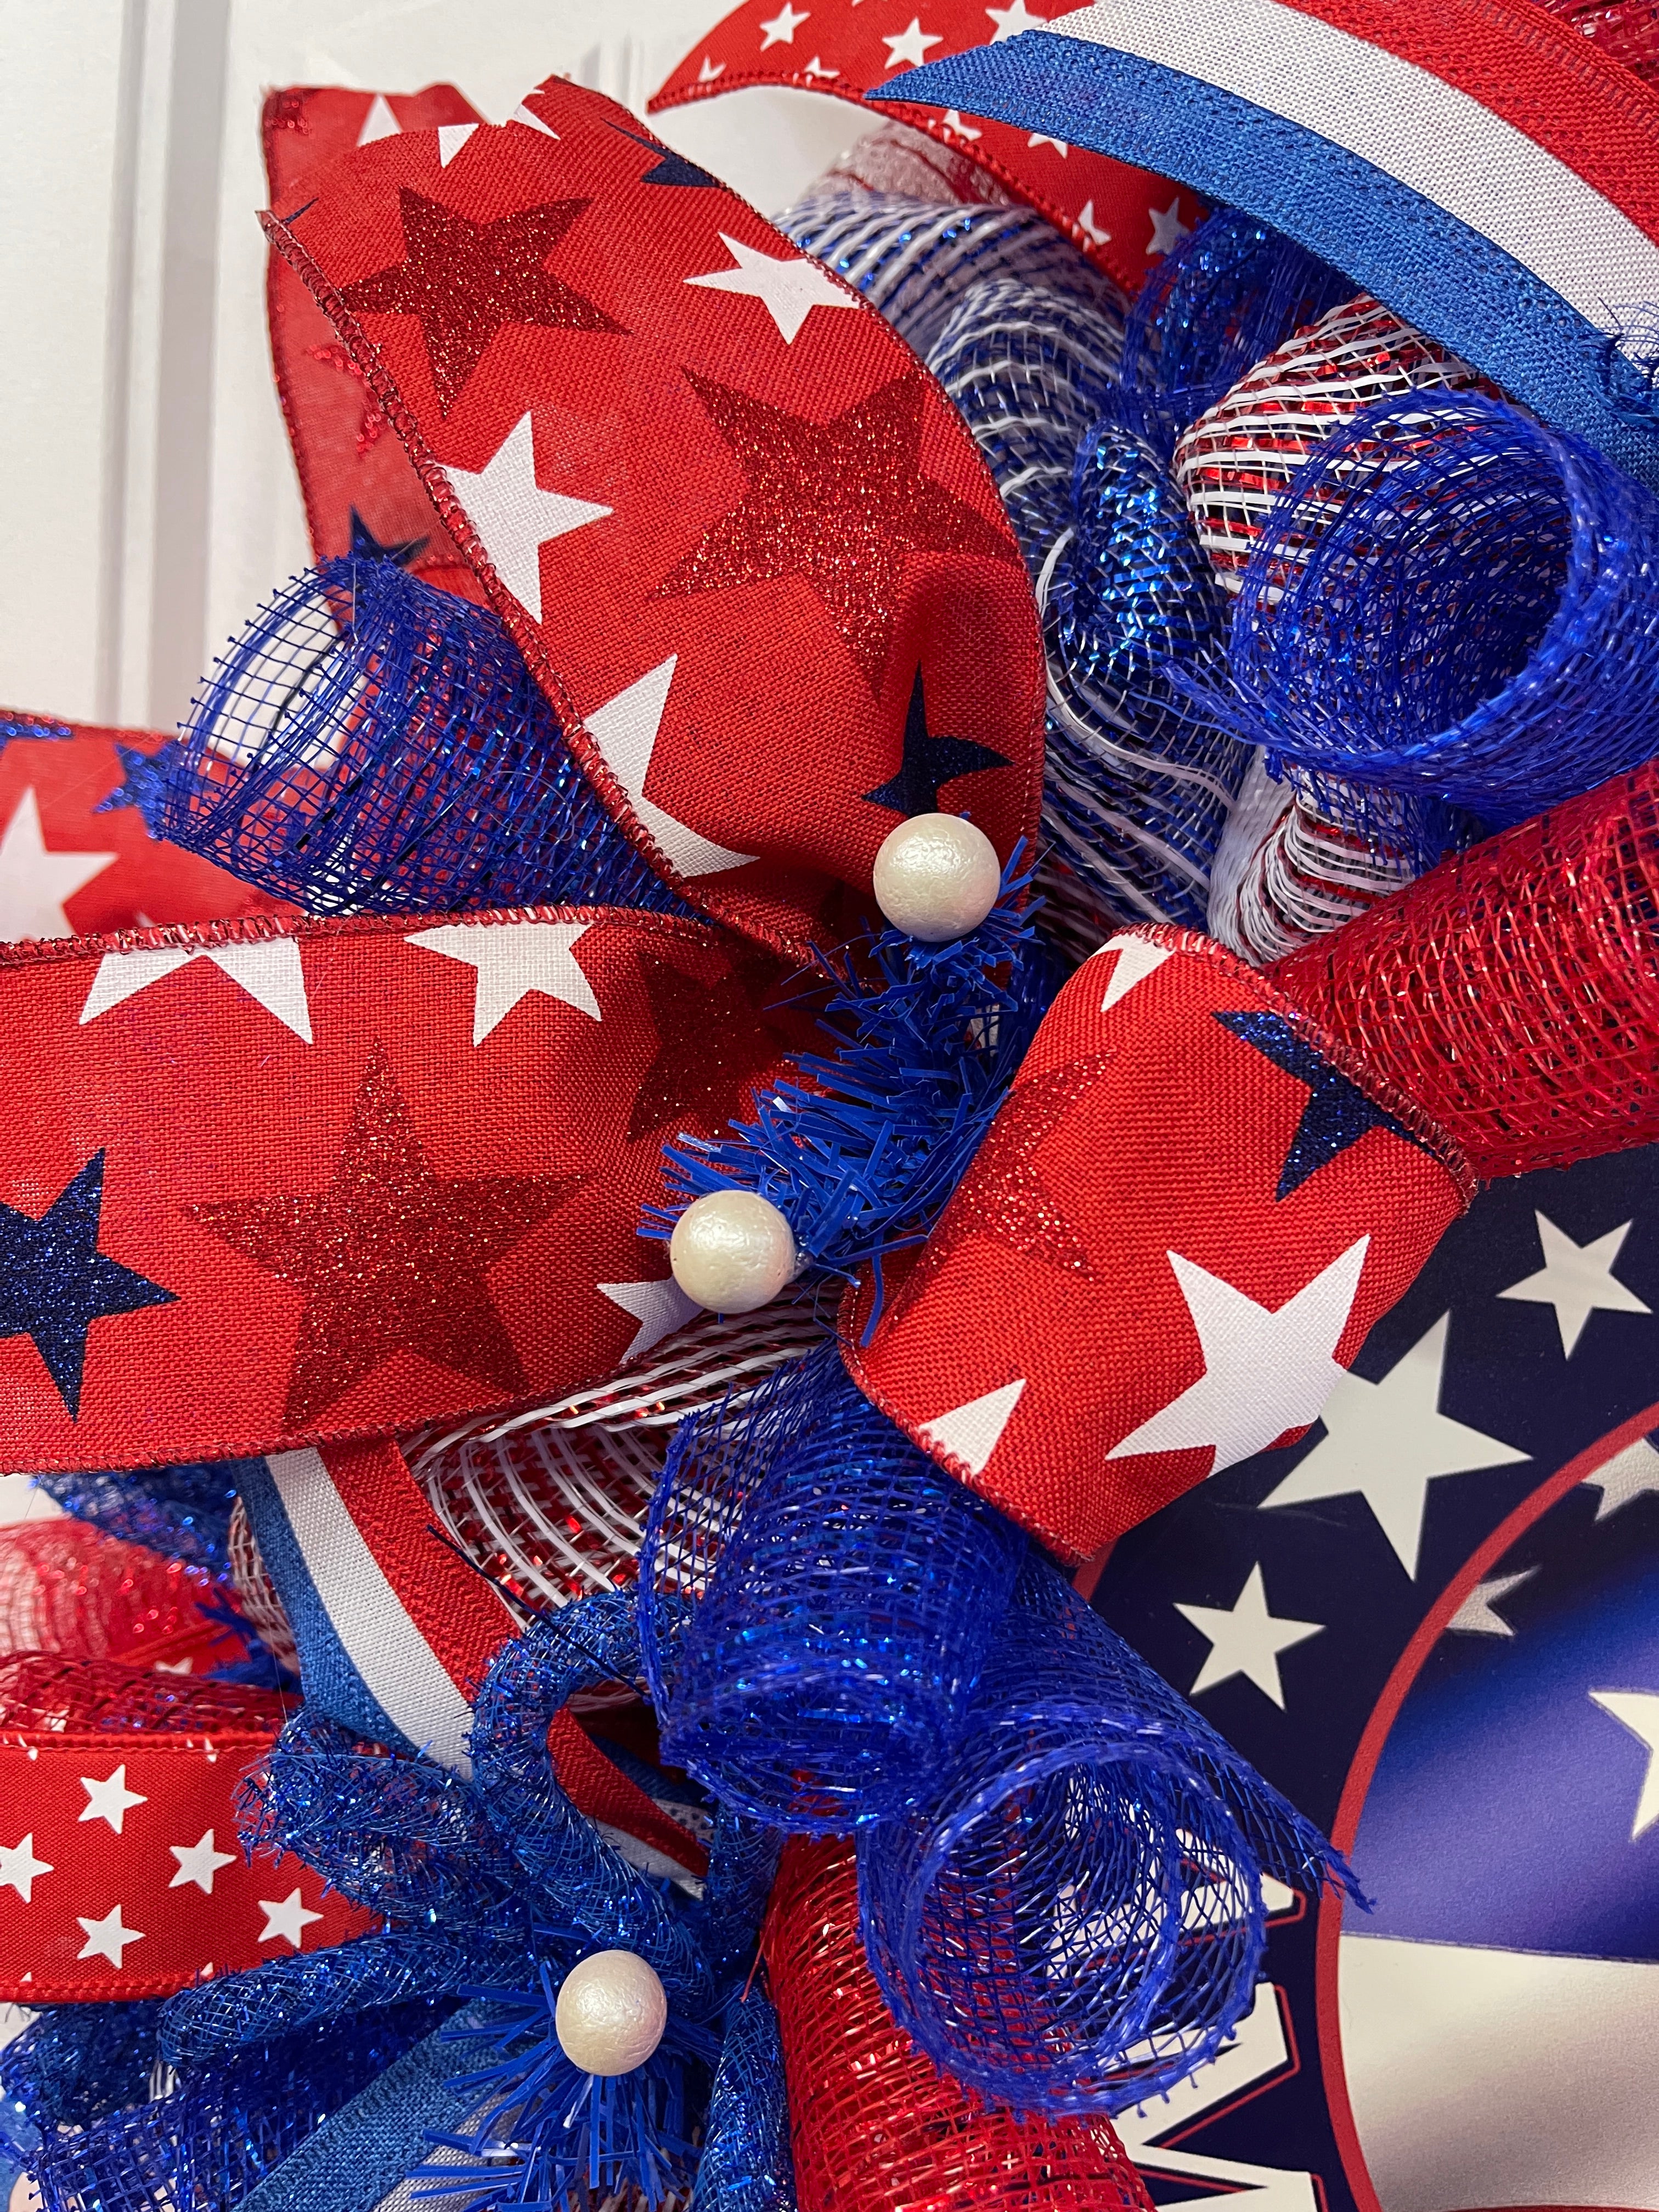 Close Up Detail with White Balls on Ribbon with Red, White and Blue Stars